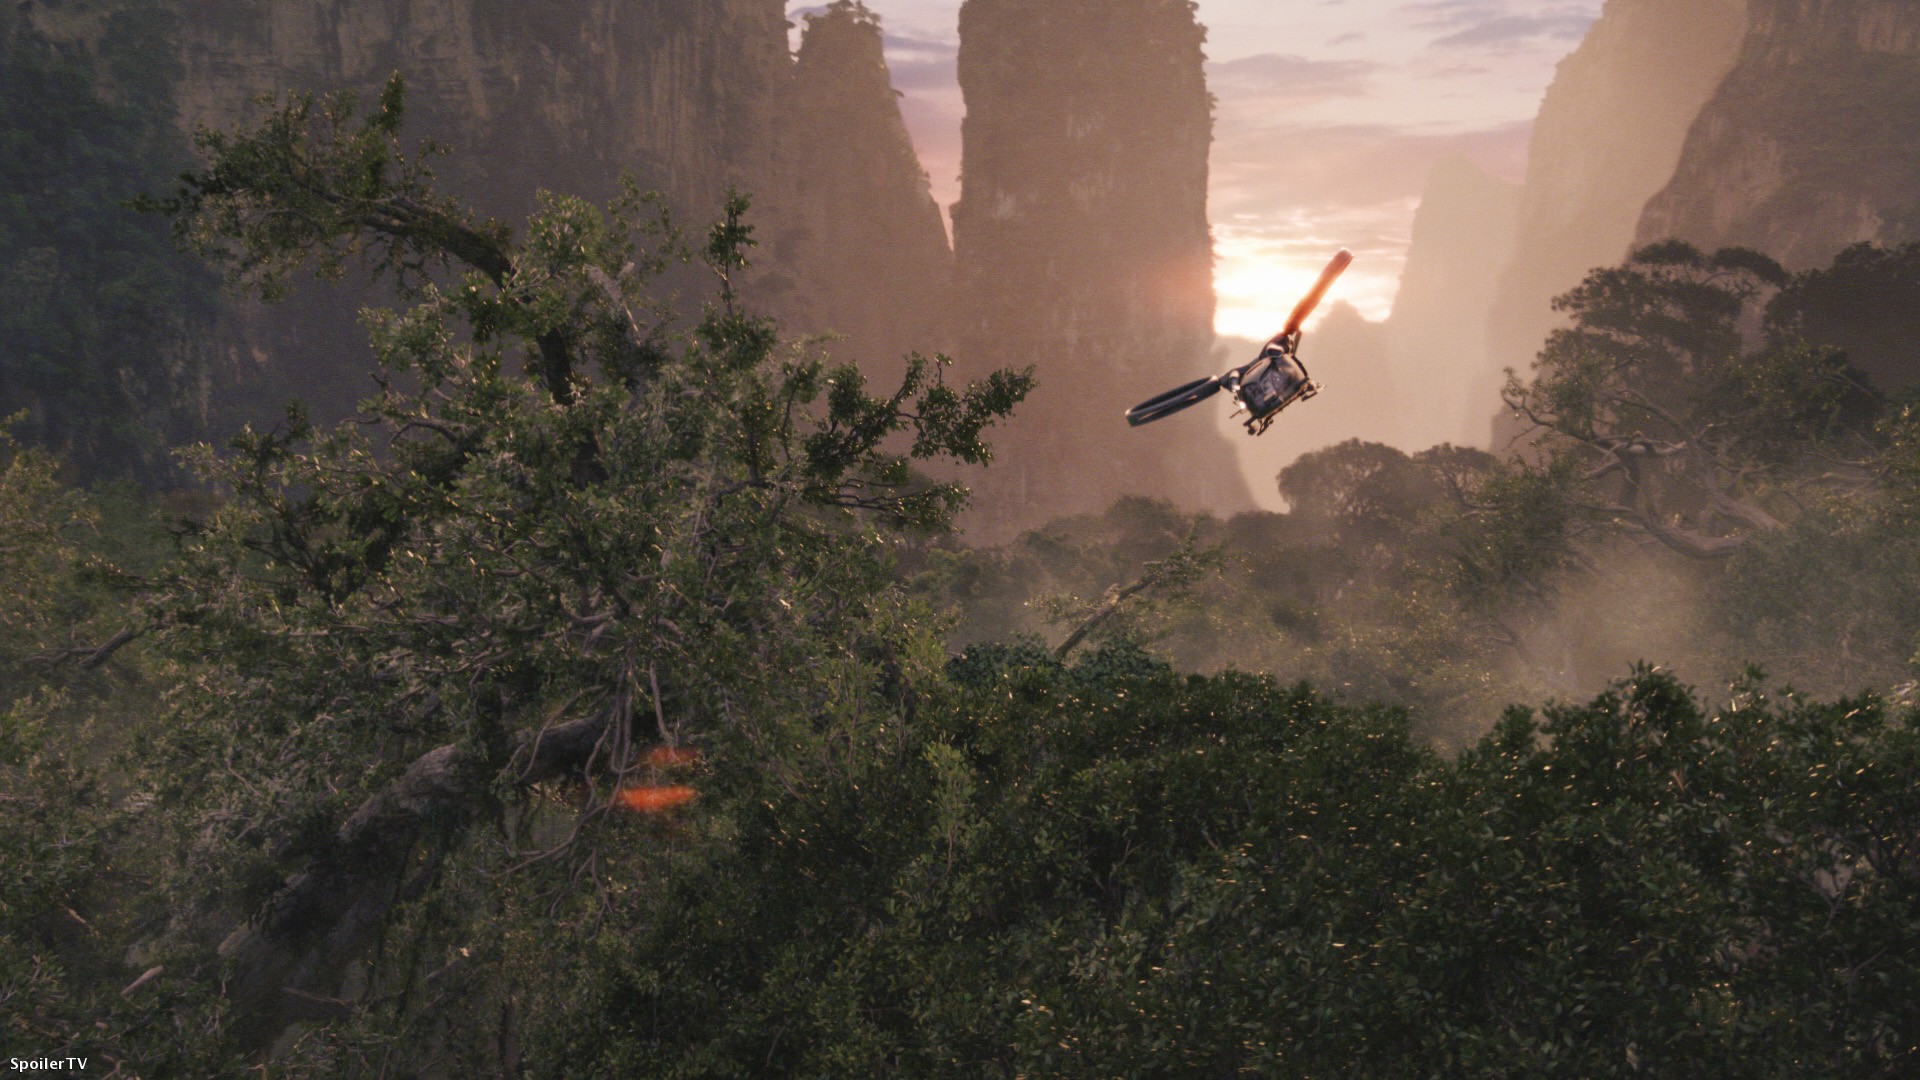 Scenic view of a forest with towering trees, mountains, and a helicopter flying overhead.